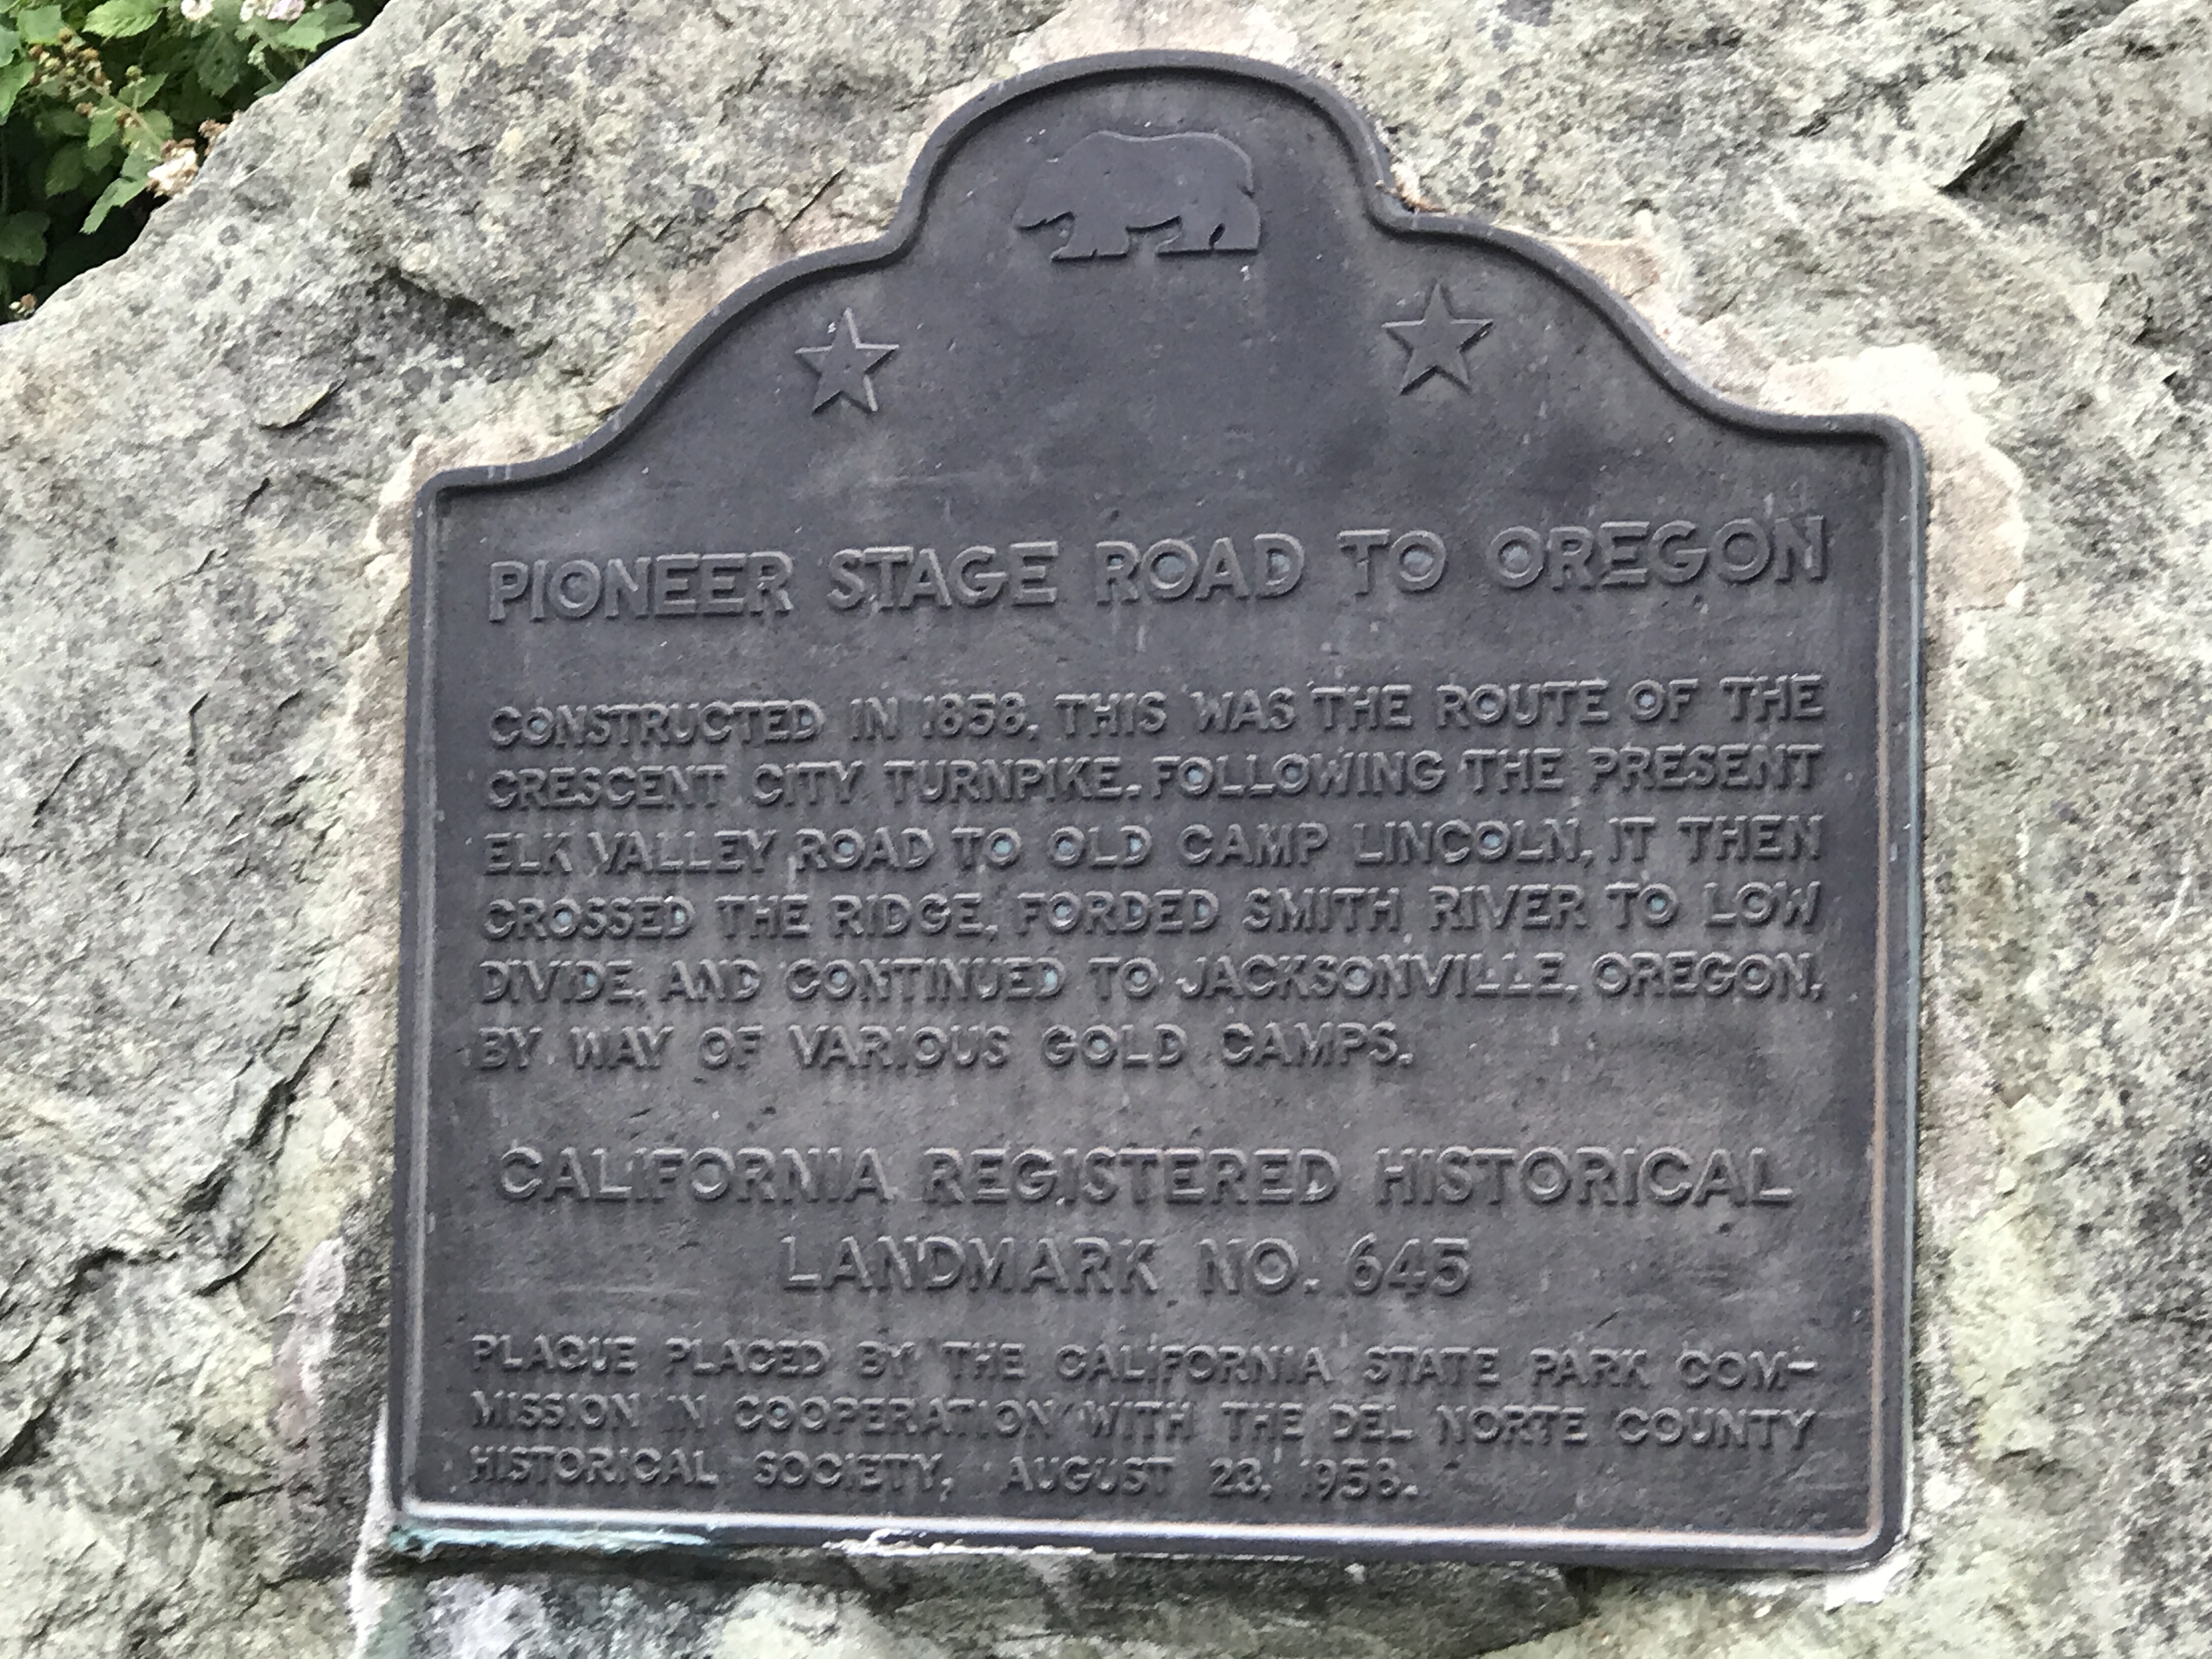 Pioneer Stage Road to Oregon Marker